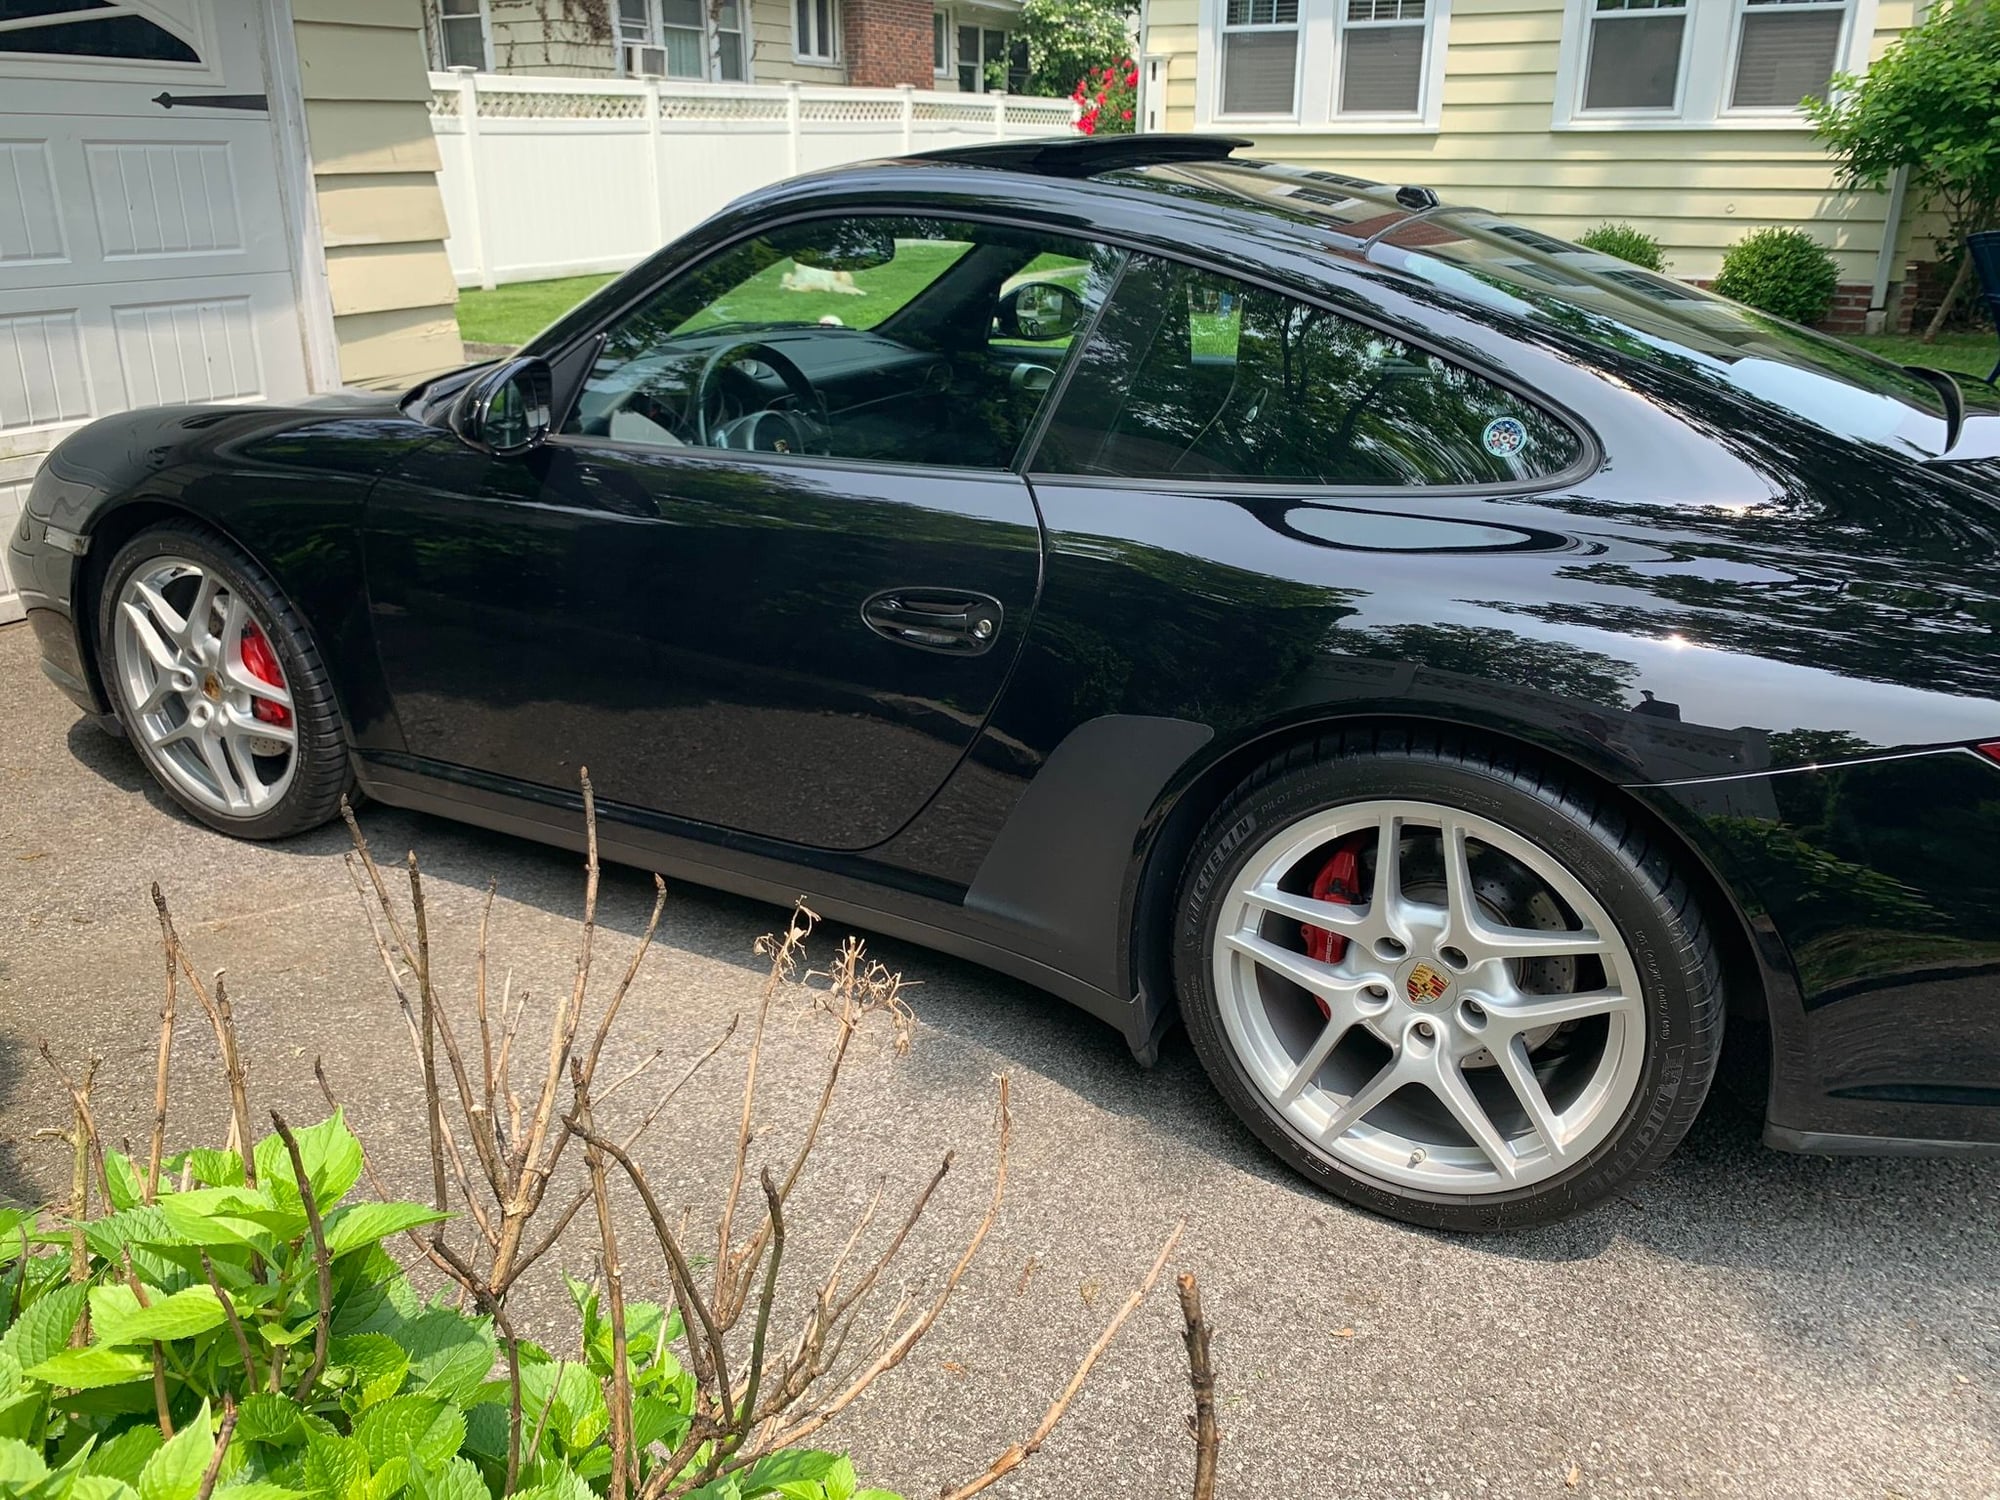 2010 Porsche 911 - 2010 Porsche 911 Carerra 4S (997.2) - Used - VIN WP0AB2A97AS720070 - 73,000 Miles - 6 cyl - 4WD - Automatic - Coupe - Black - Pelham Manor, NY 10803, United States